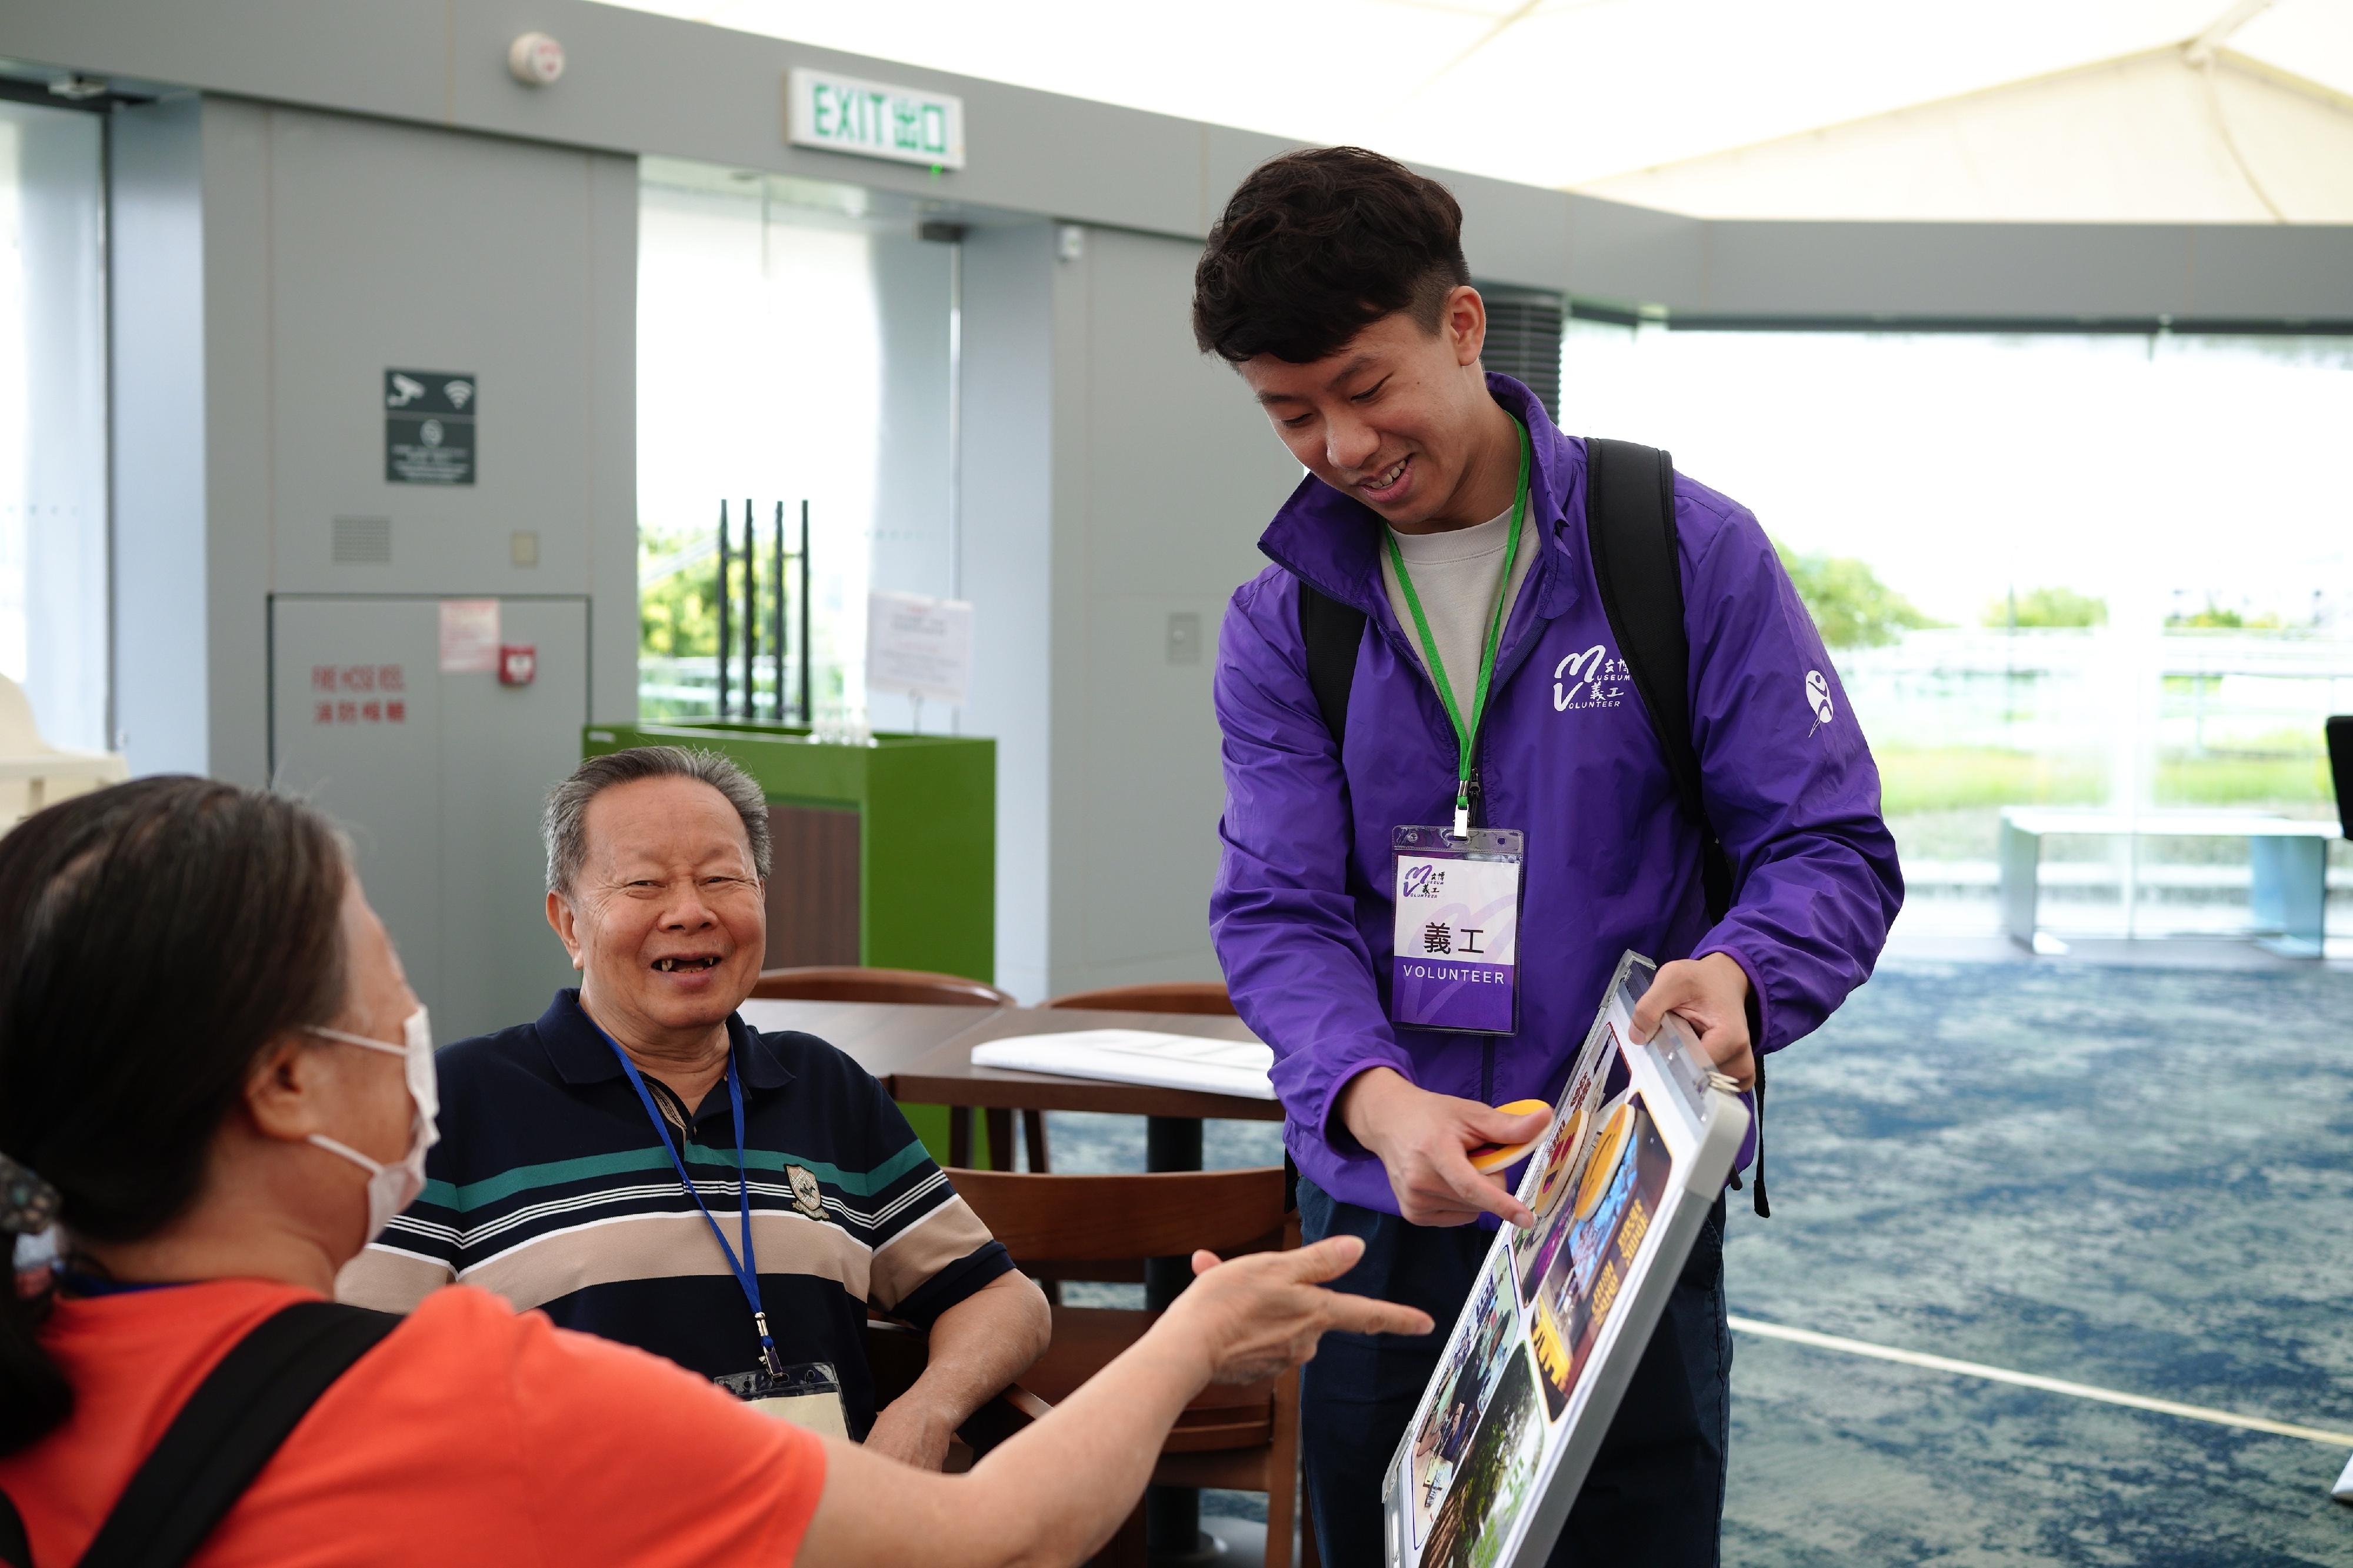 The Leisure and Cultural Services Department (LCSD) will start recruiting museum volunteers in March to serve in museums under the LCSD in various aspects. Photo shows a volunteer interacting with participants in the Listening & Wonder Museum programme.